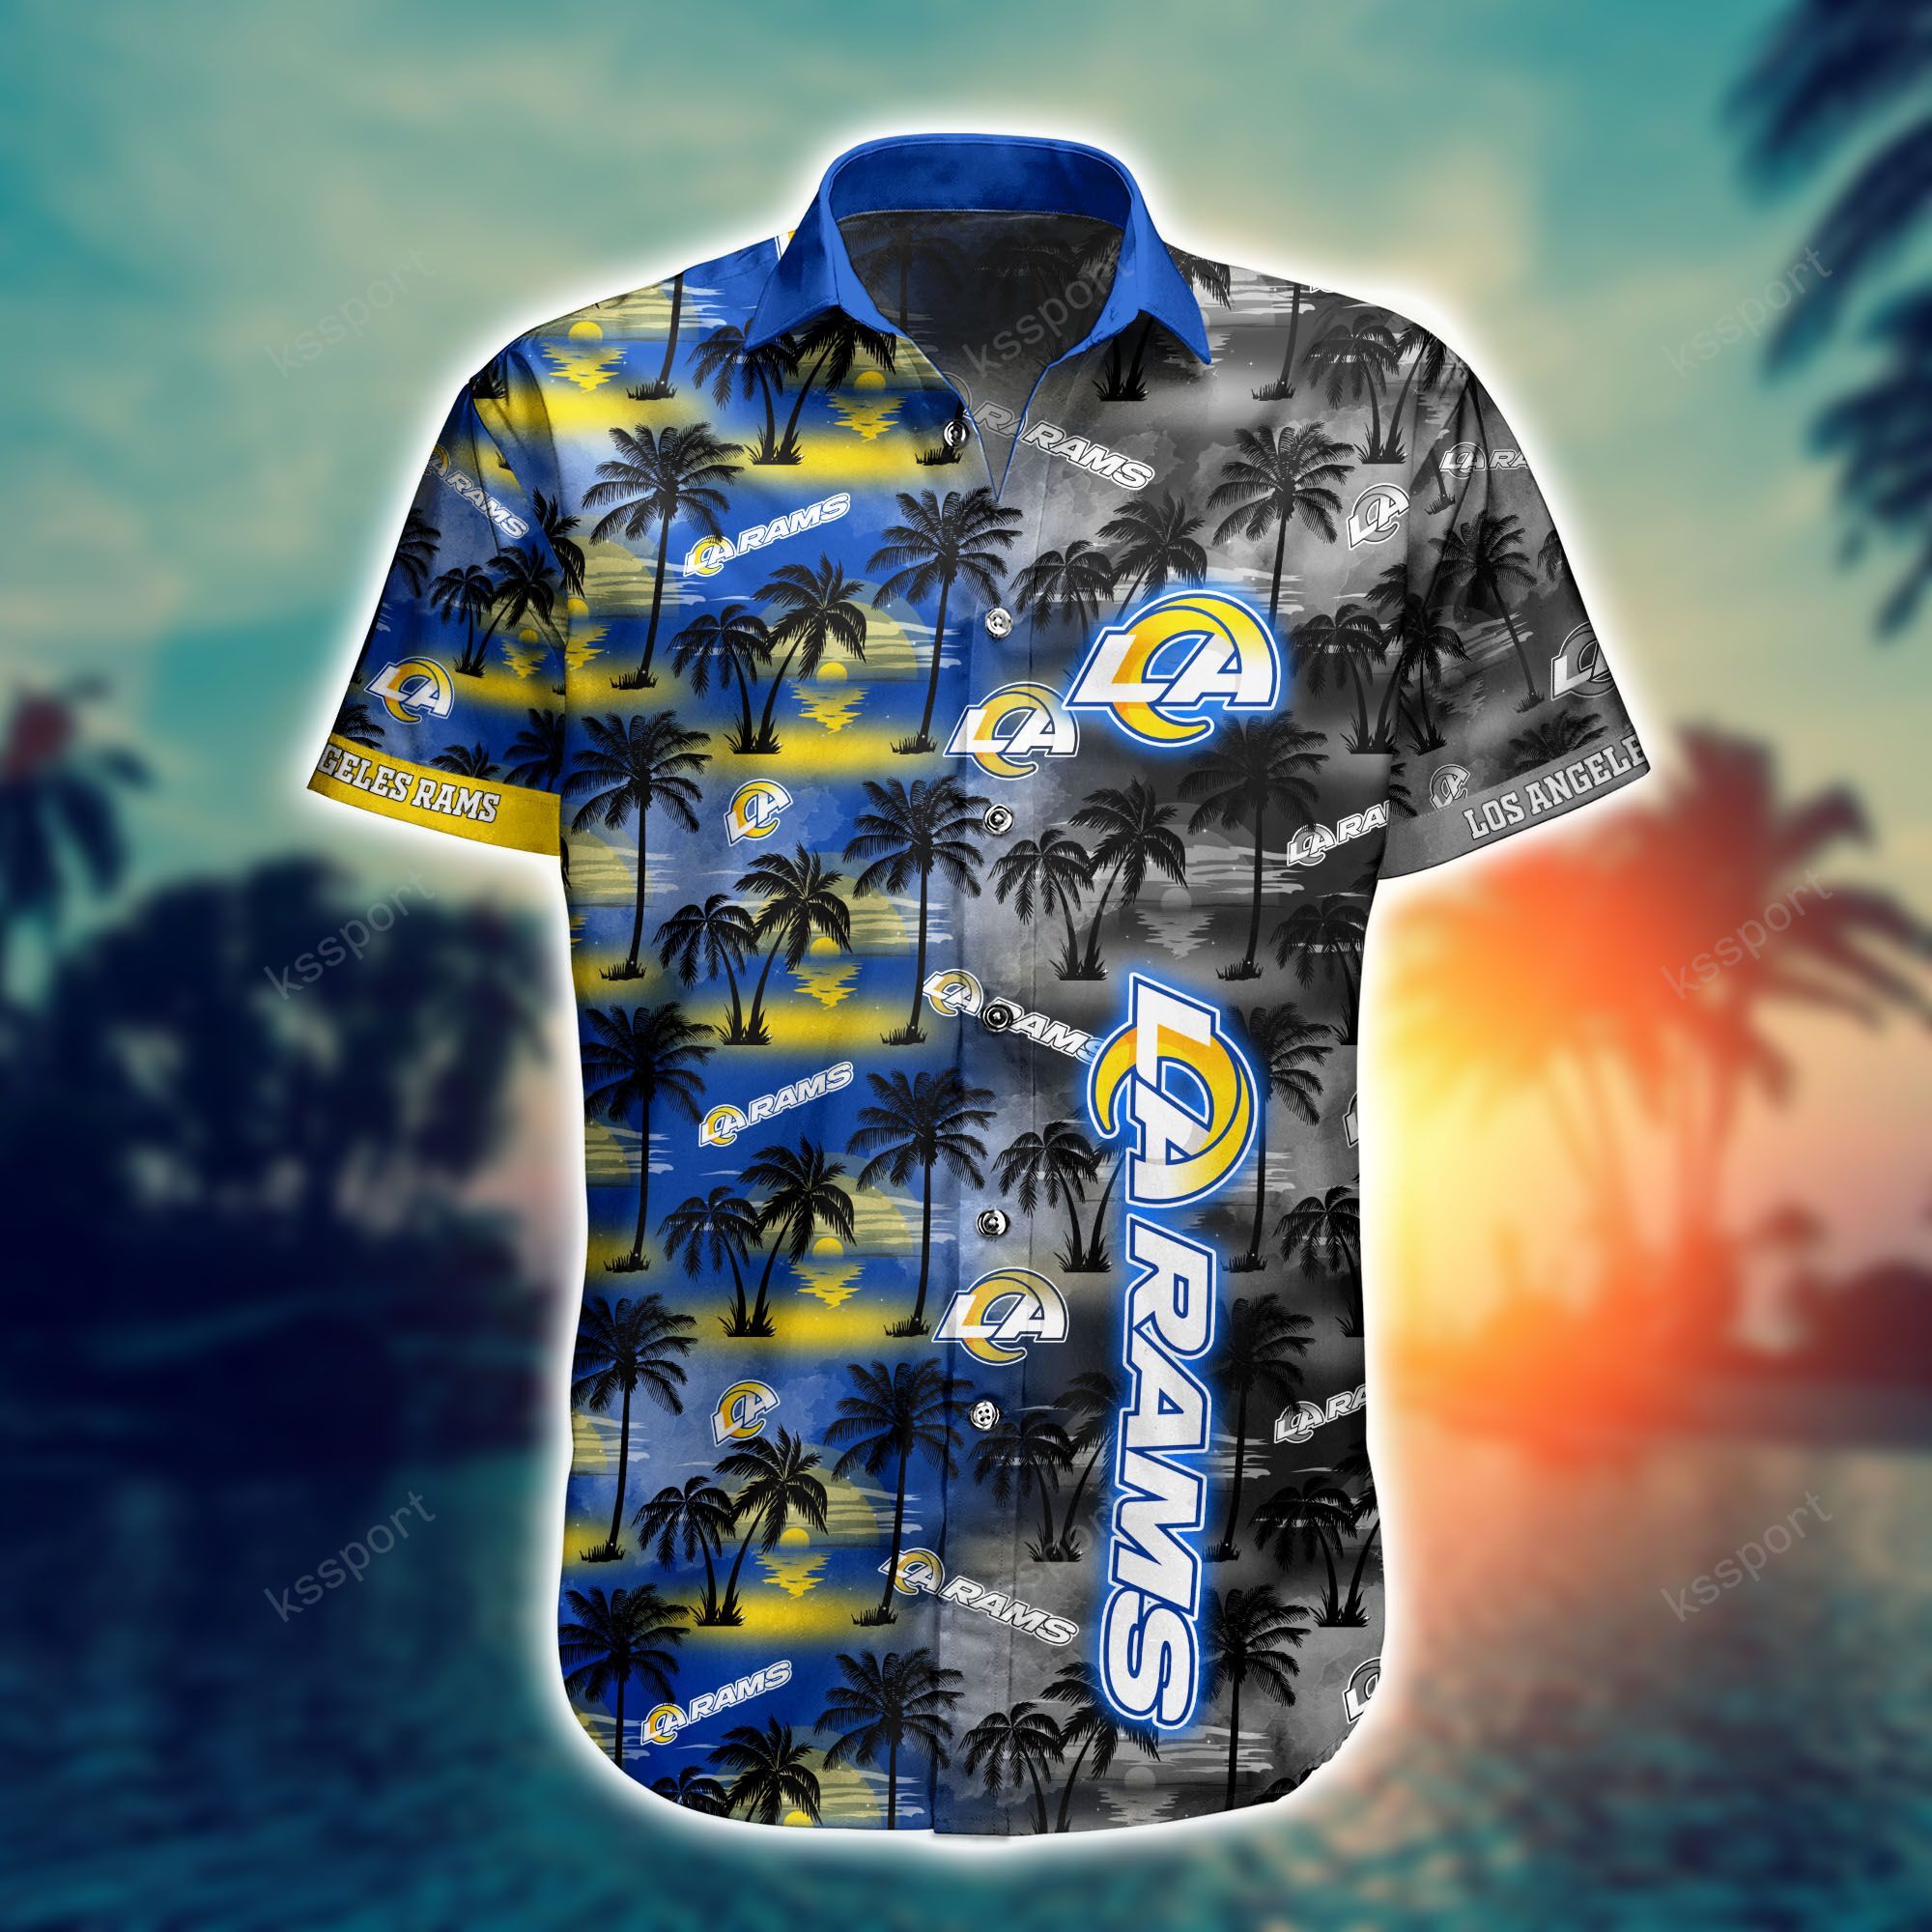 Top cool Hawaiian shirt 2022 - Make sure you get yours today before they run out! 194